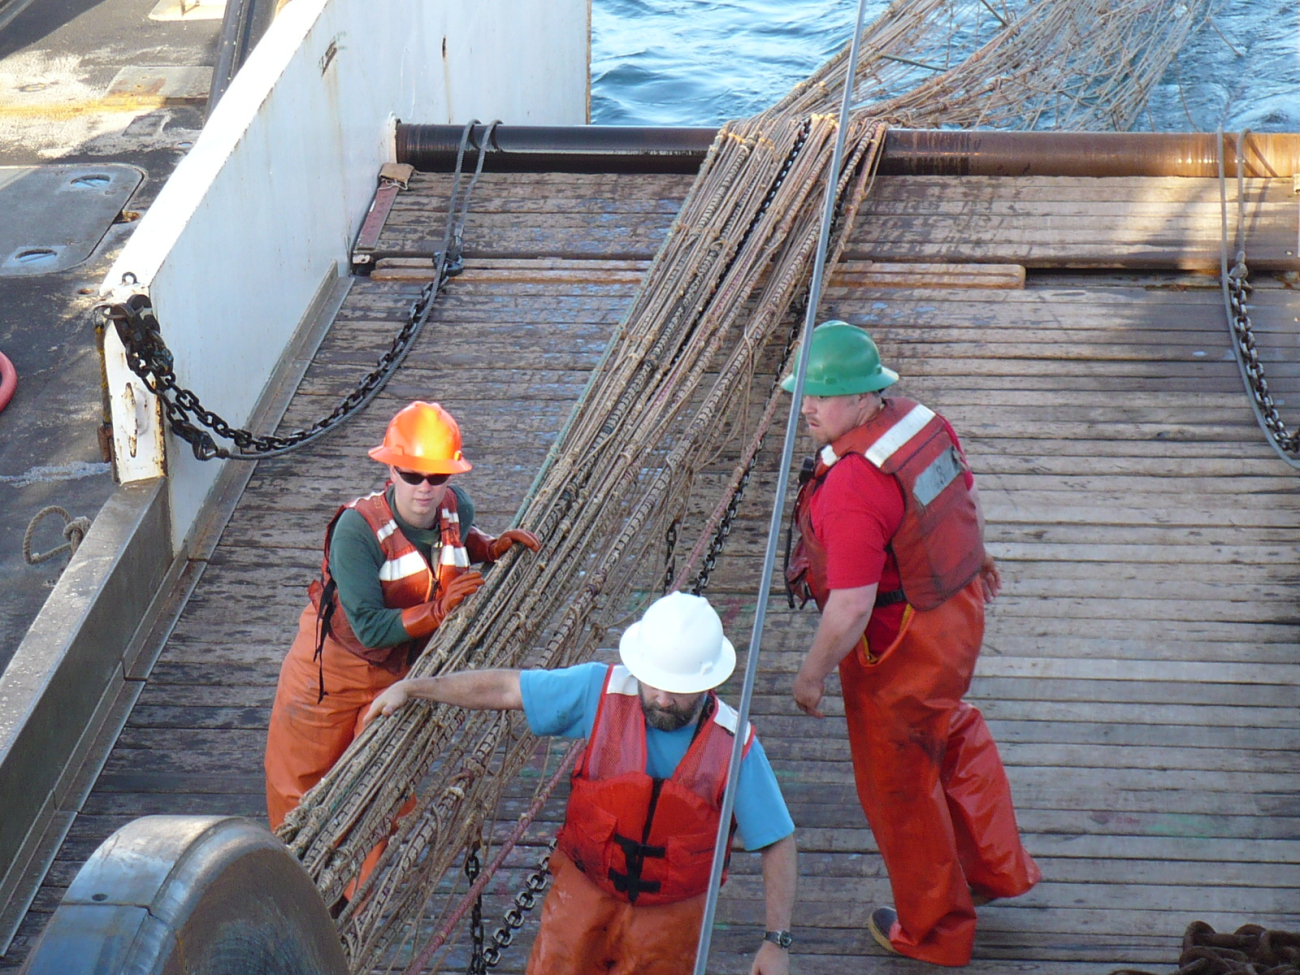 Recovering net during trawl operations